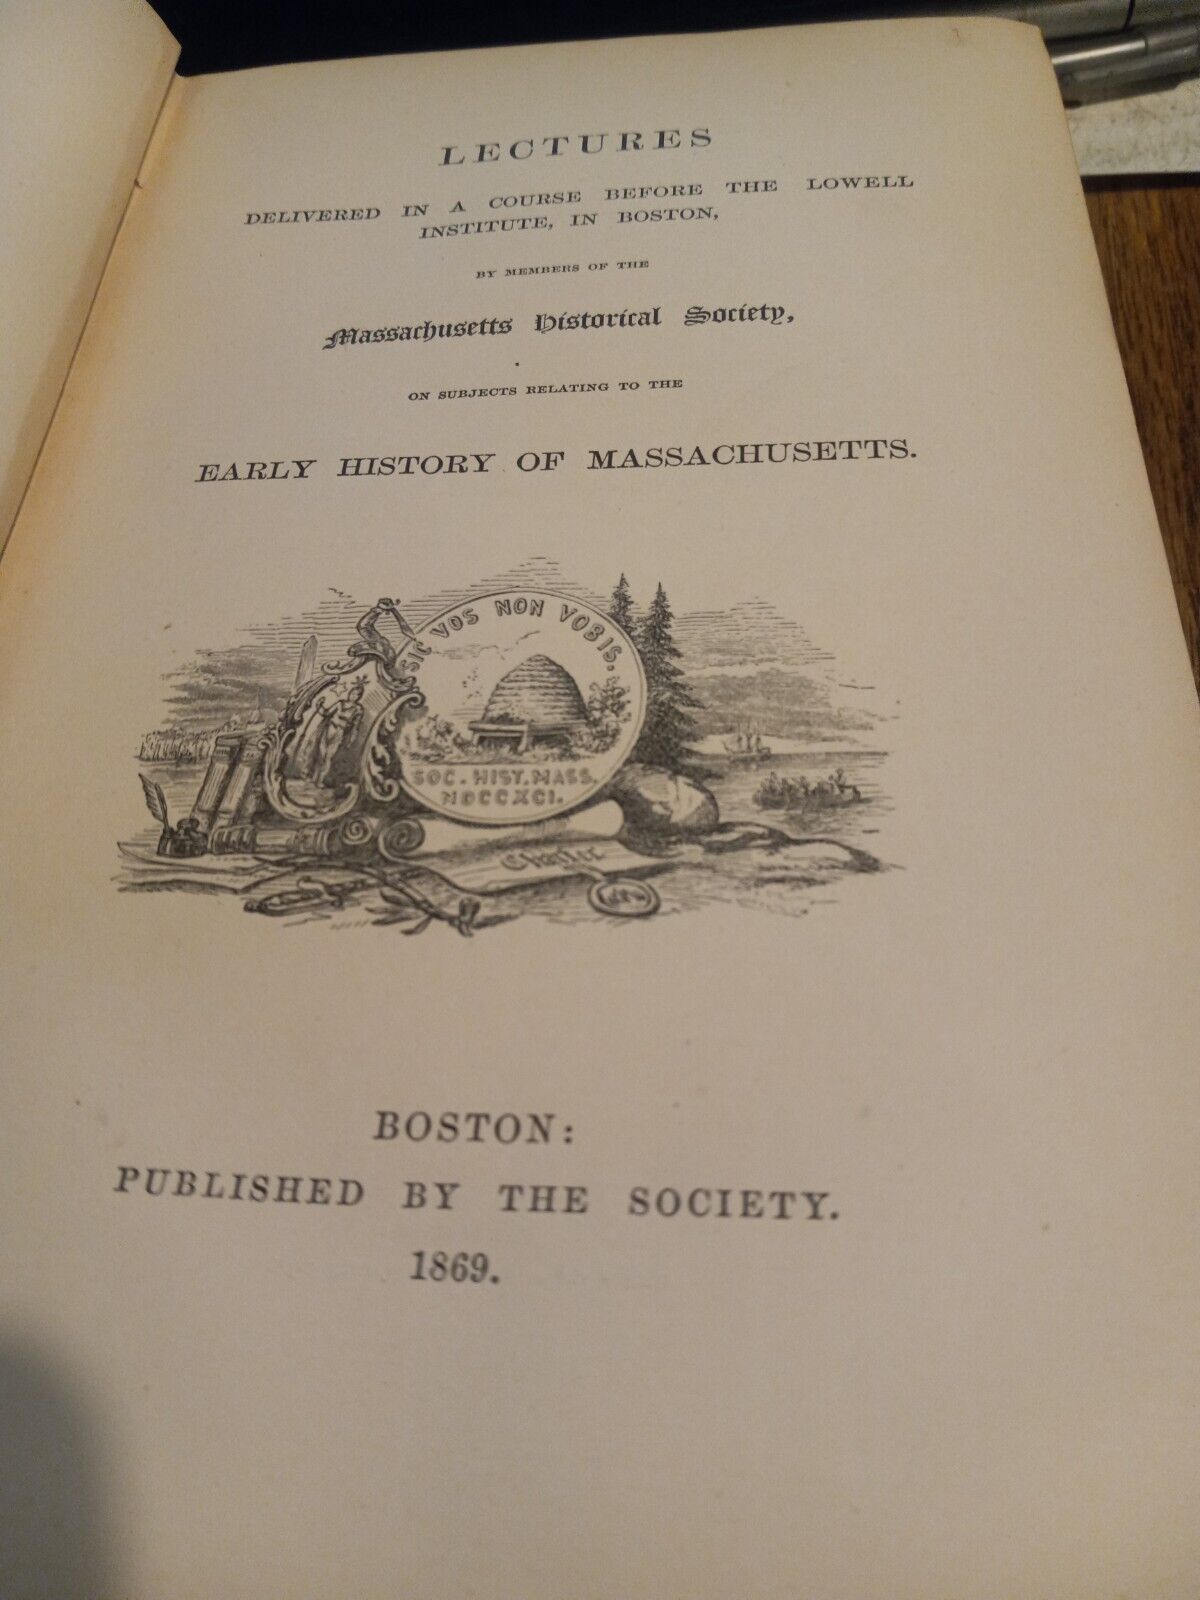 1869 HISTORICAL SOCIETY LECTURES BY MEMBERS ON EARLY HISTORY OF MASSACHUSETTS